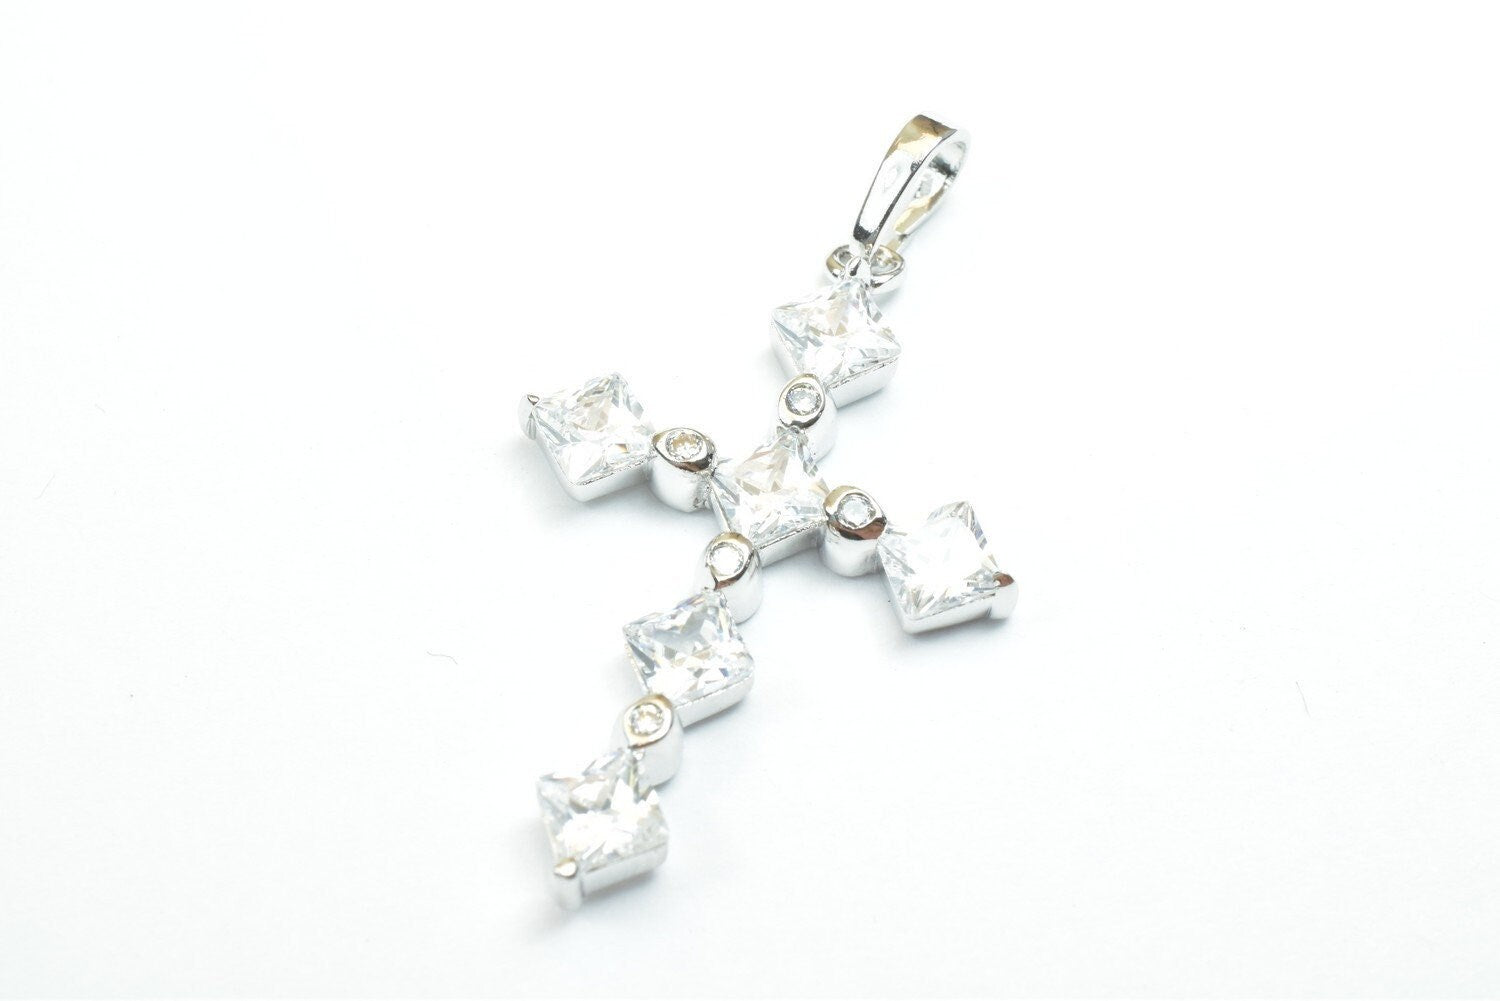 White gold filled cross pendant with cubic zircon (cz) rhinestone rhodium plated charm size 31x21mm, thickness 3mm for jewelry making rp73